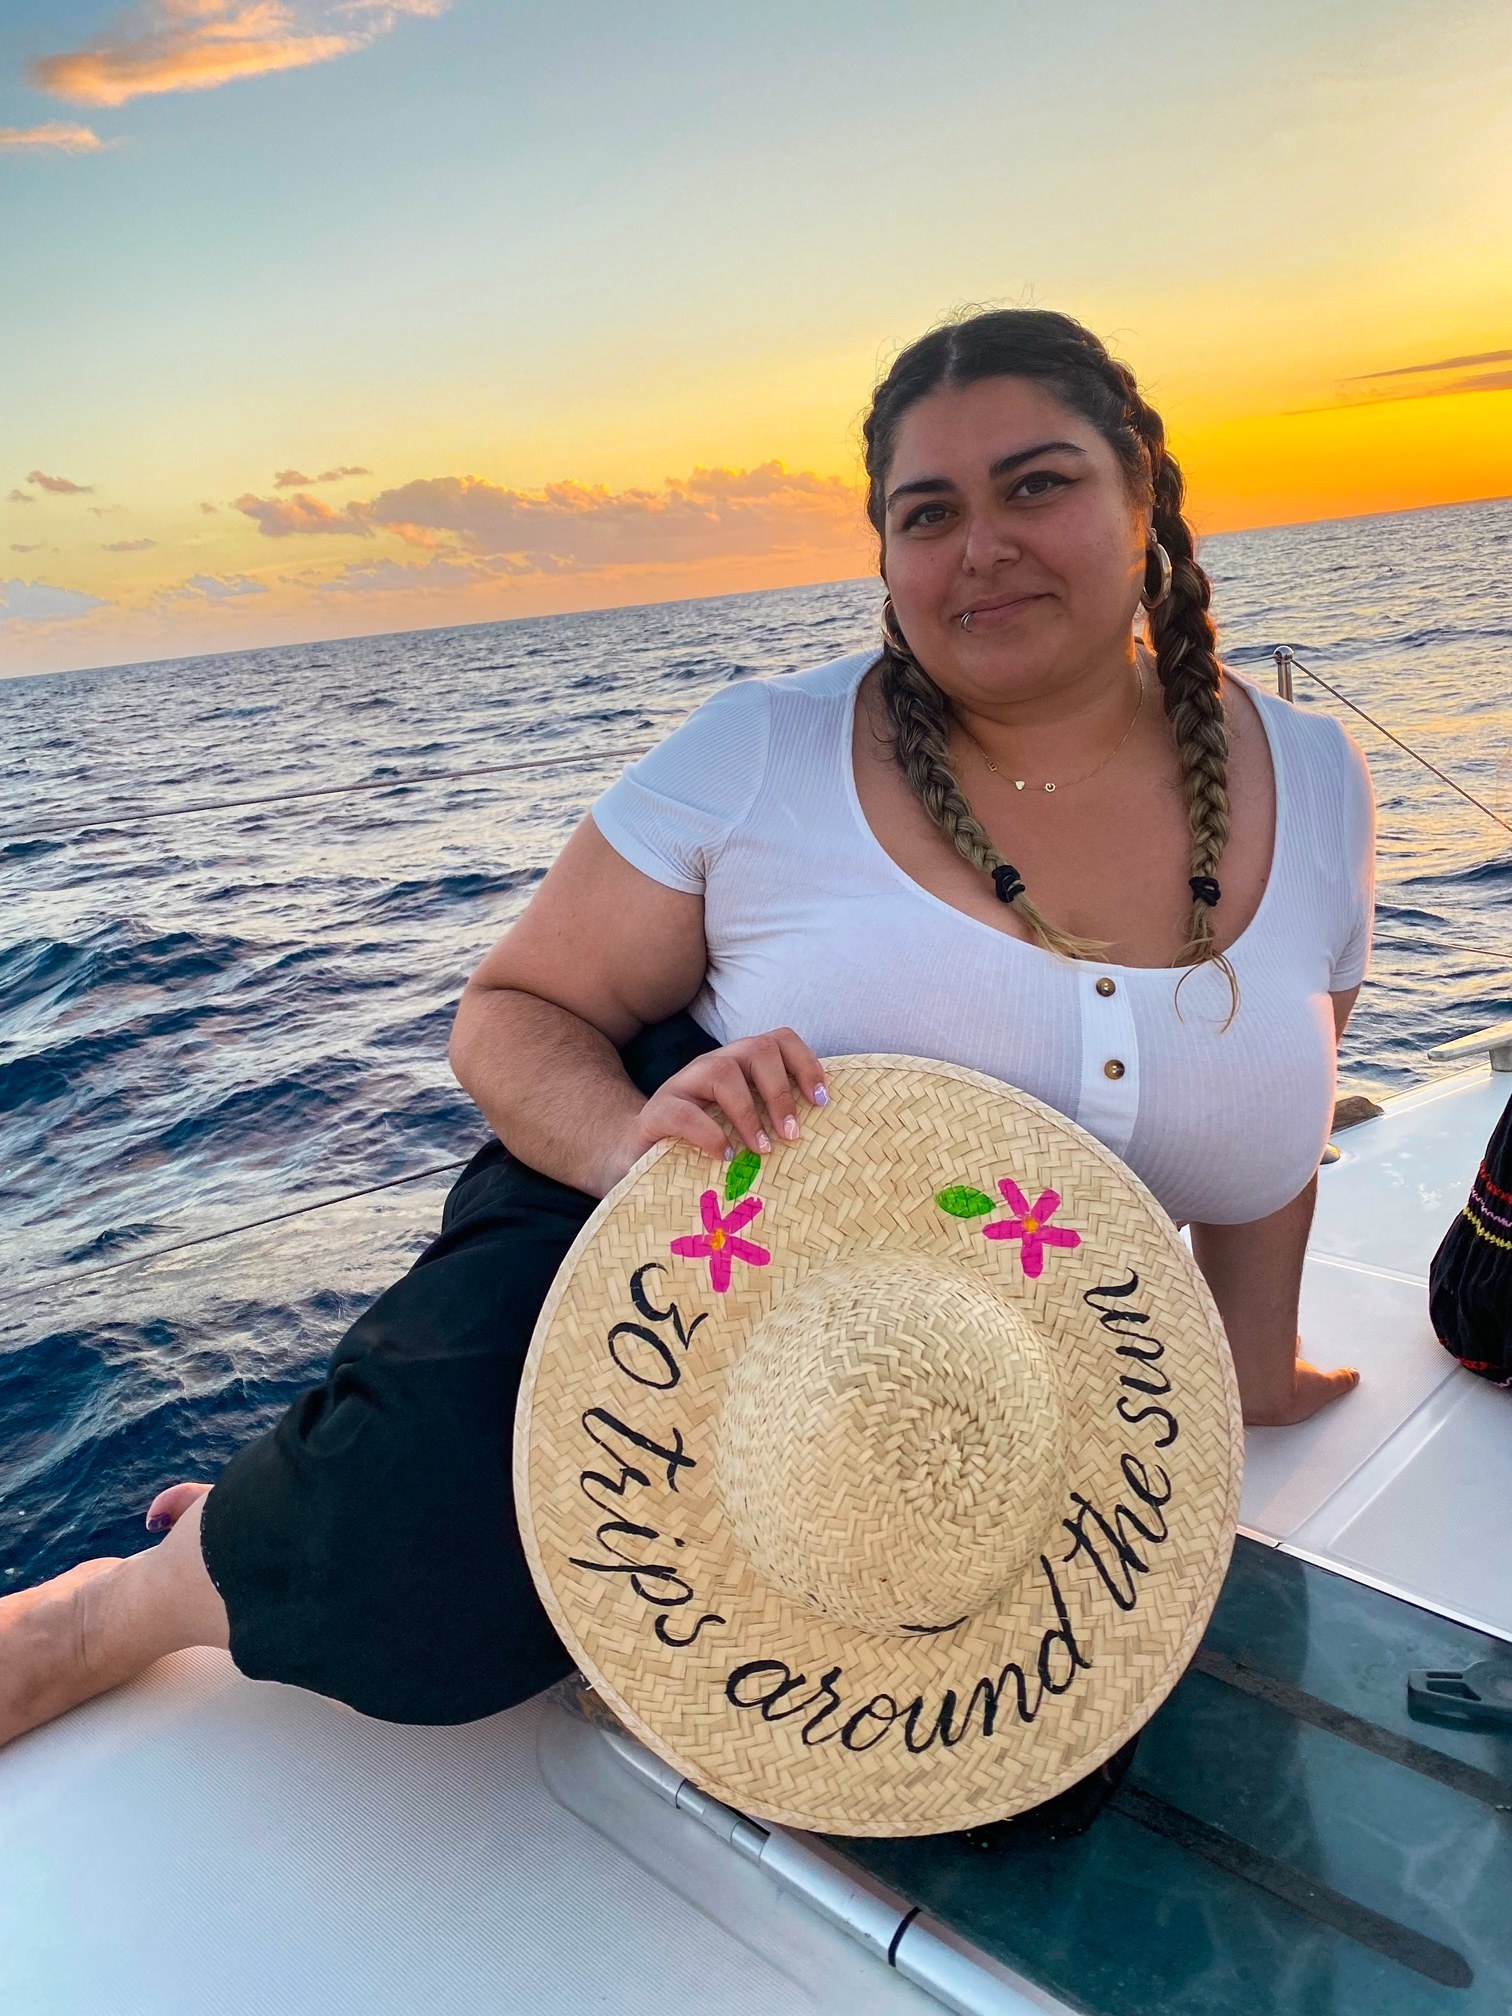 Woman on a boat holding a hat that says &quot;30 trips around the sun&quot;